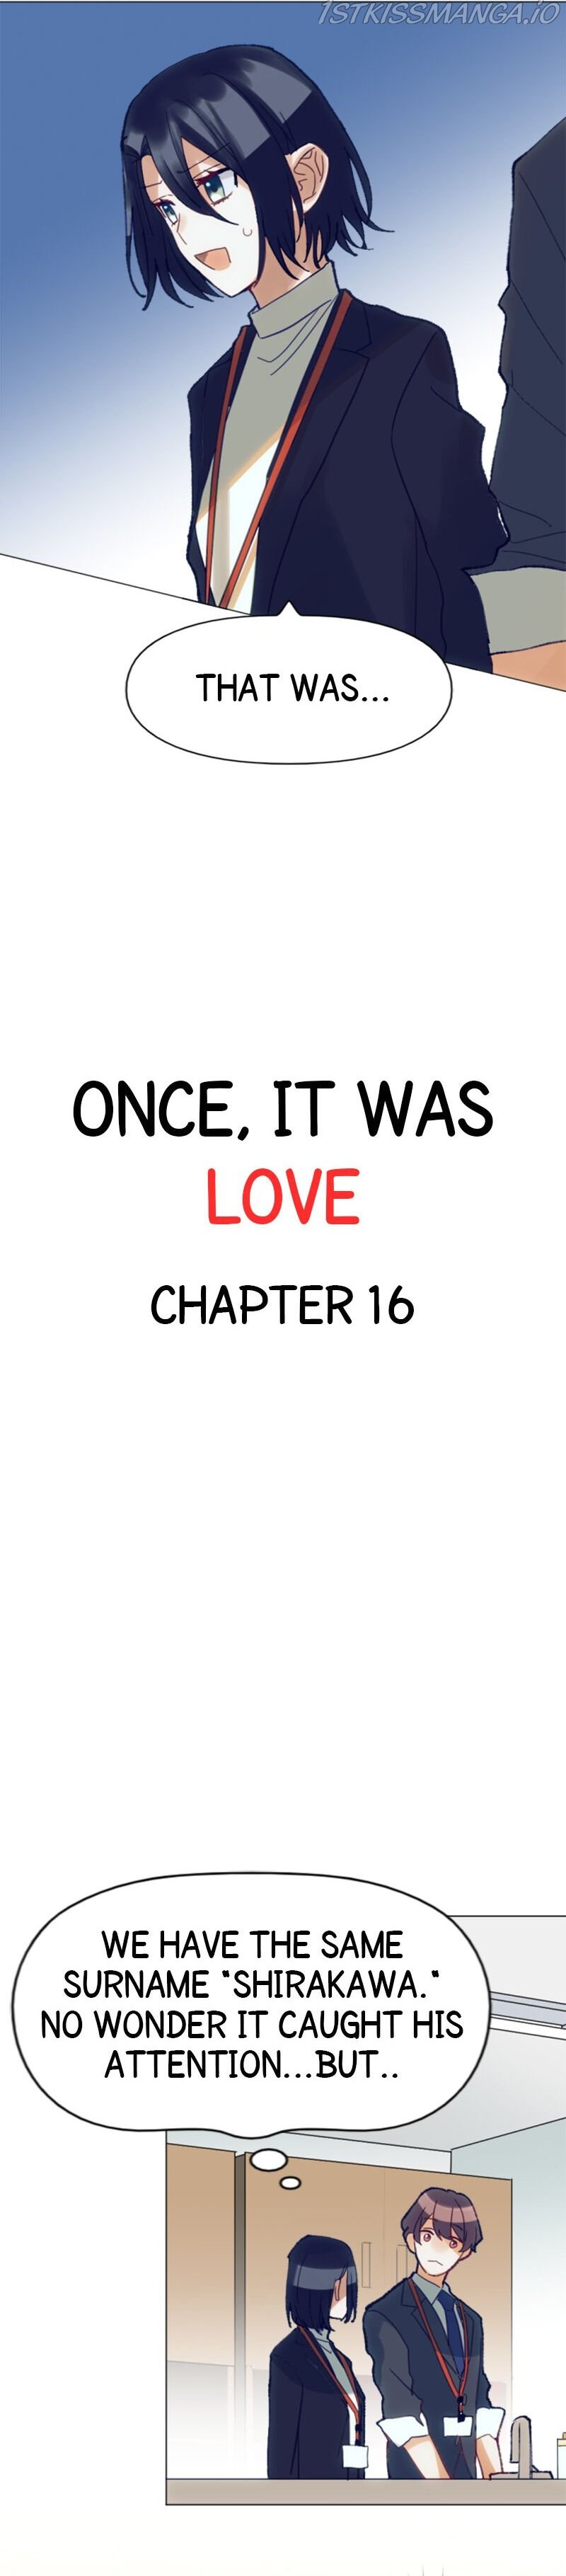 Once, It Was Love chapter 16